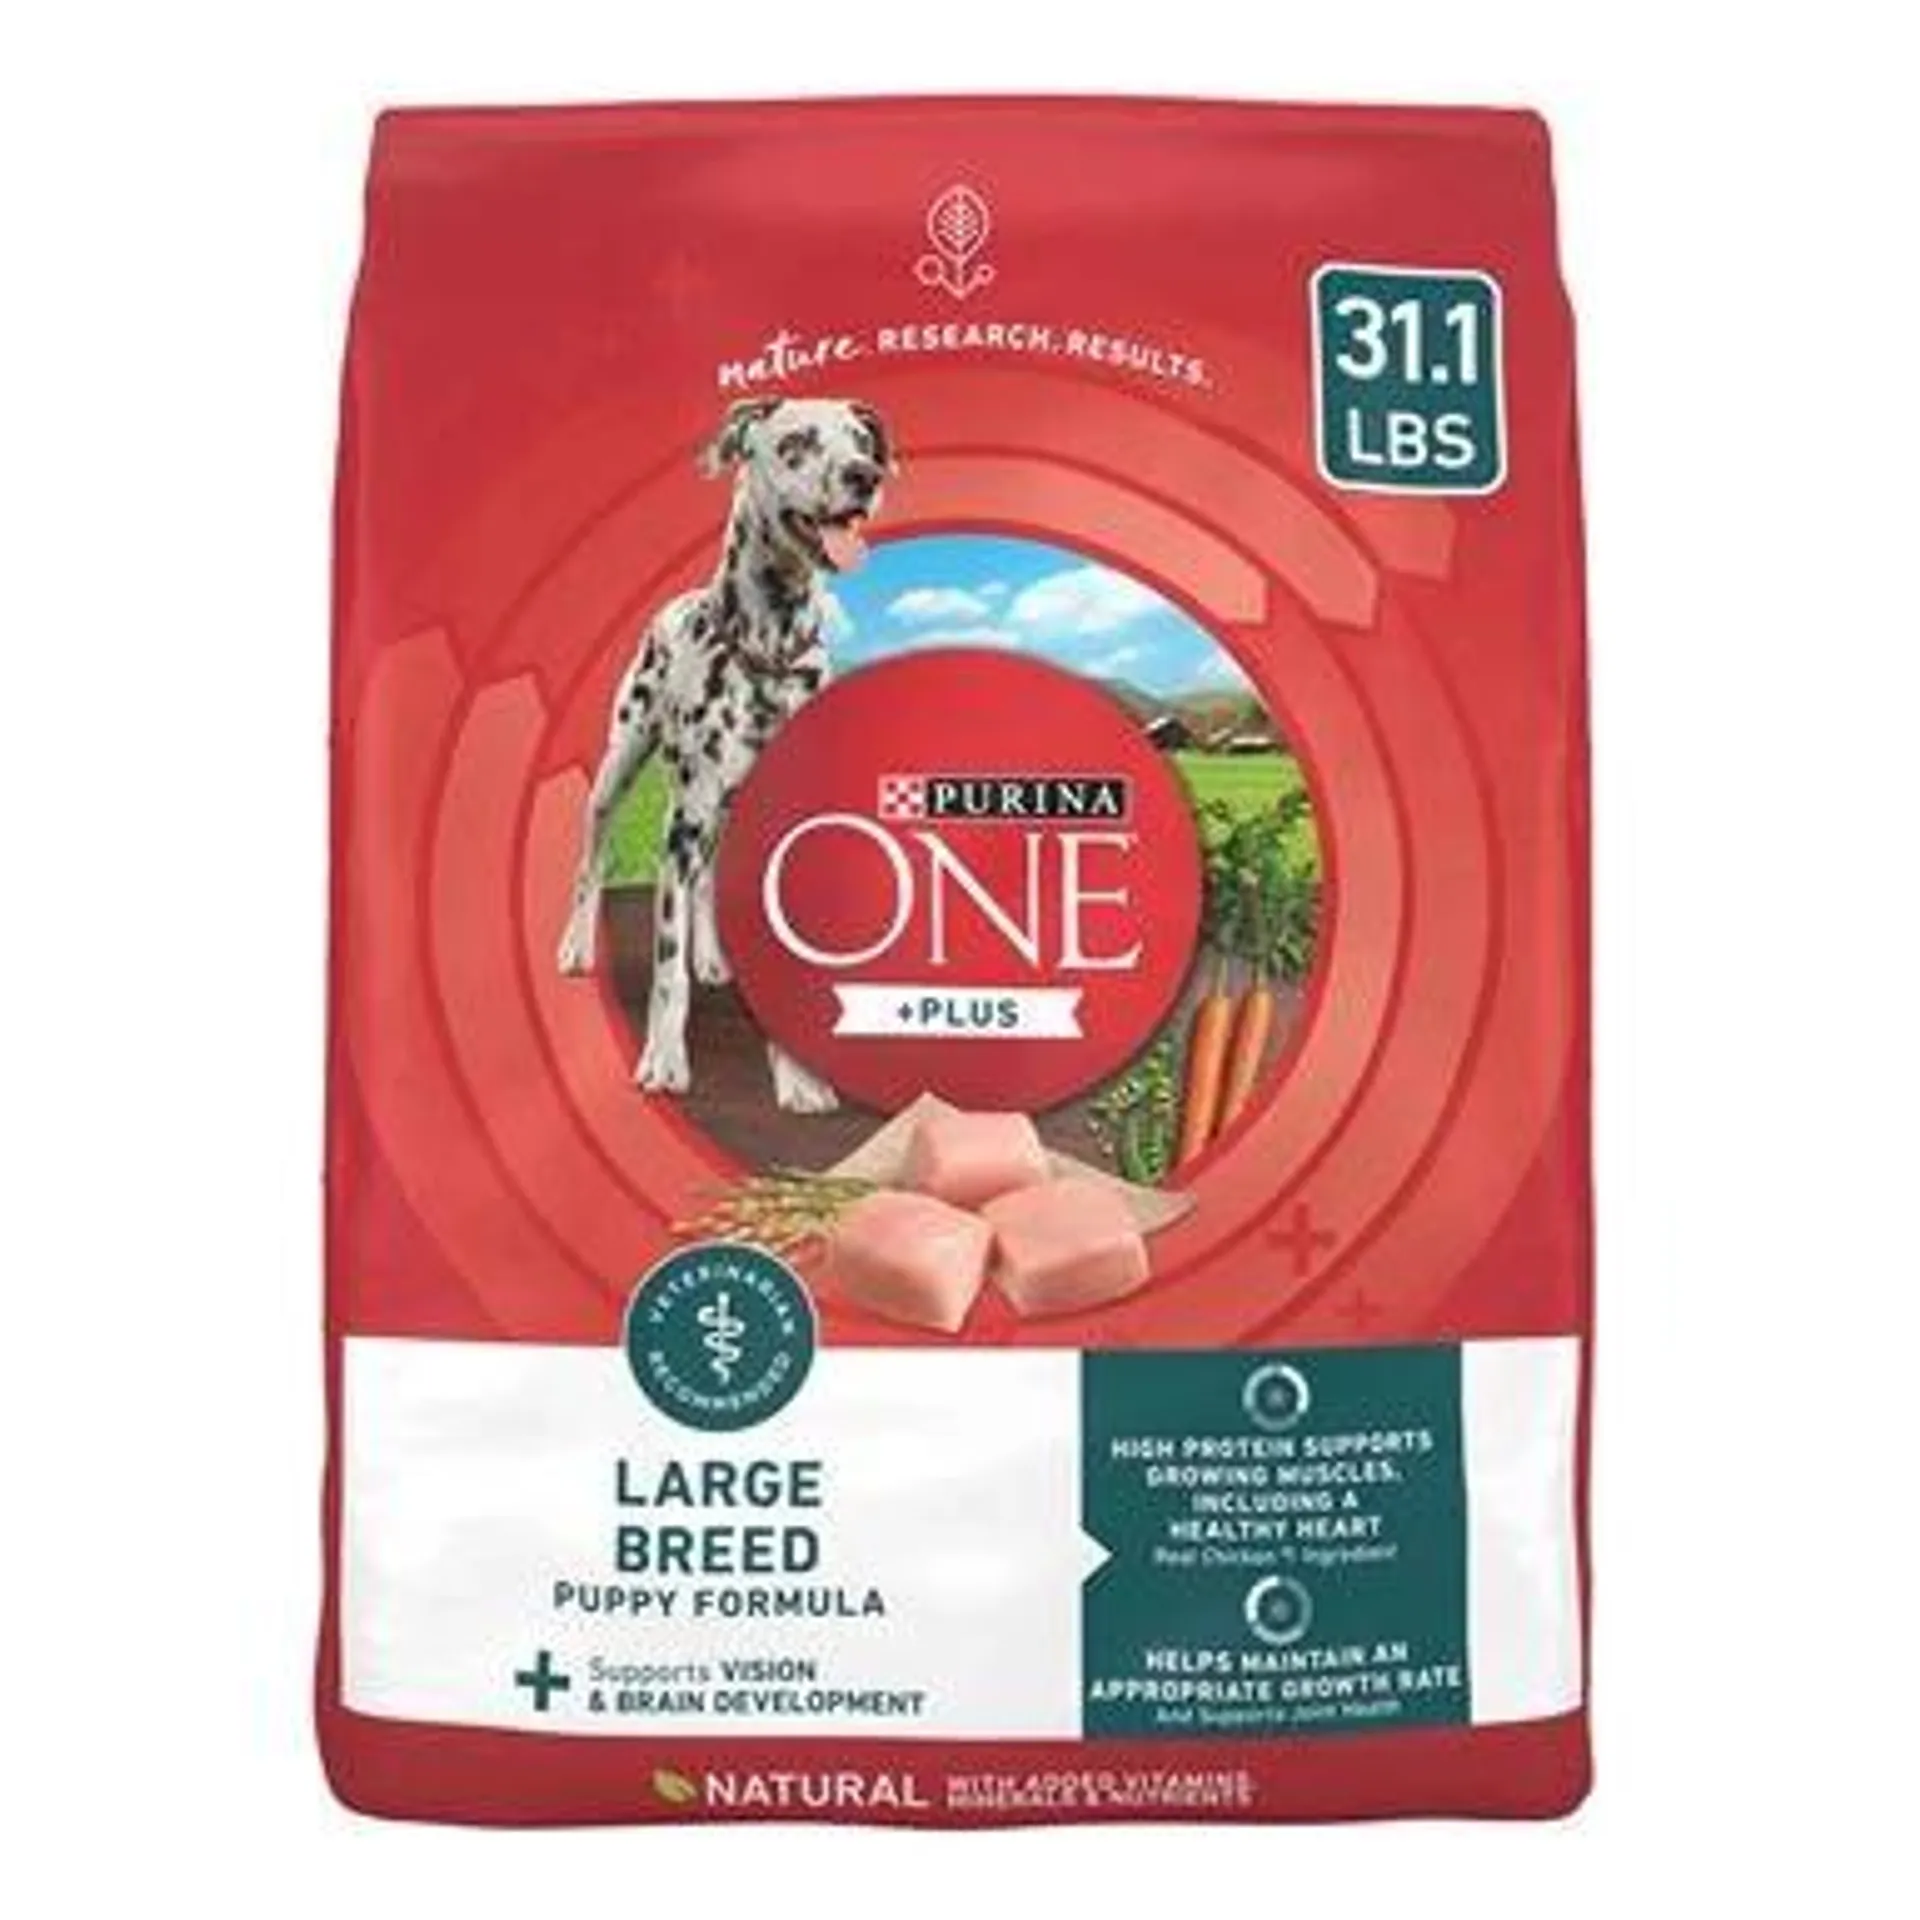 Purina ONE Plus Large Breed Puppy Food Dry Formula - 31.1 Pound Bag